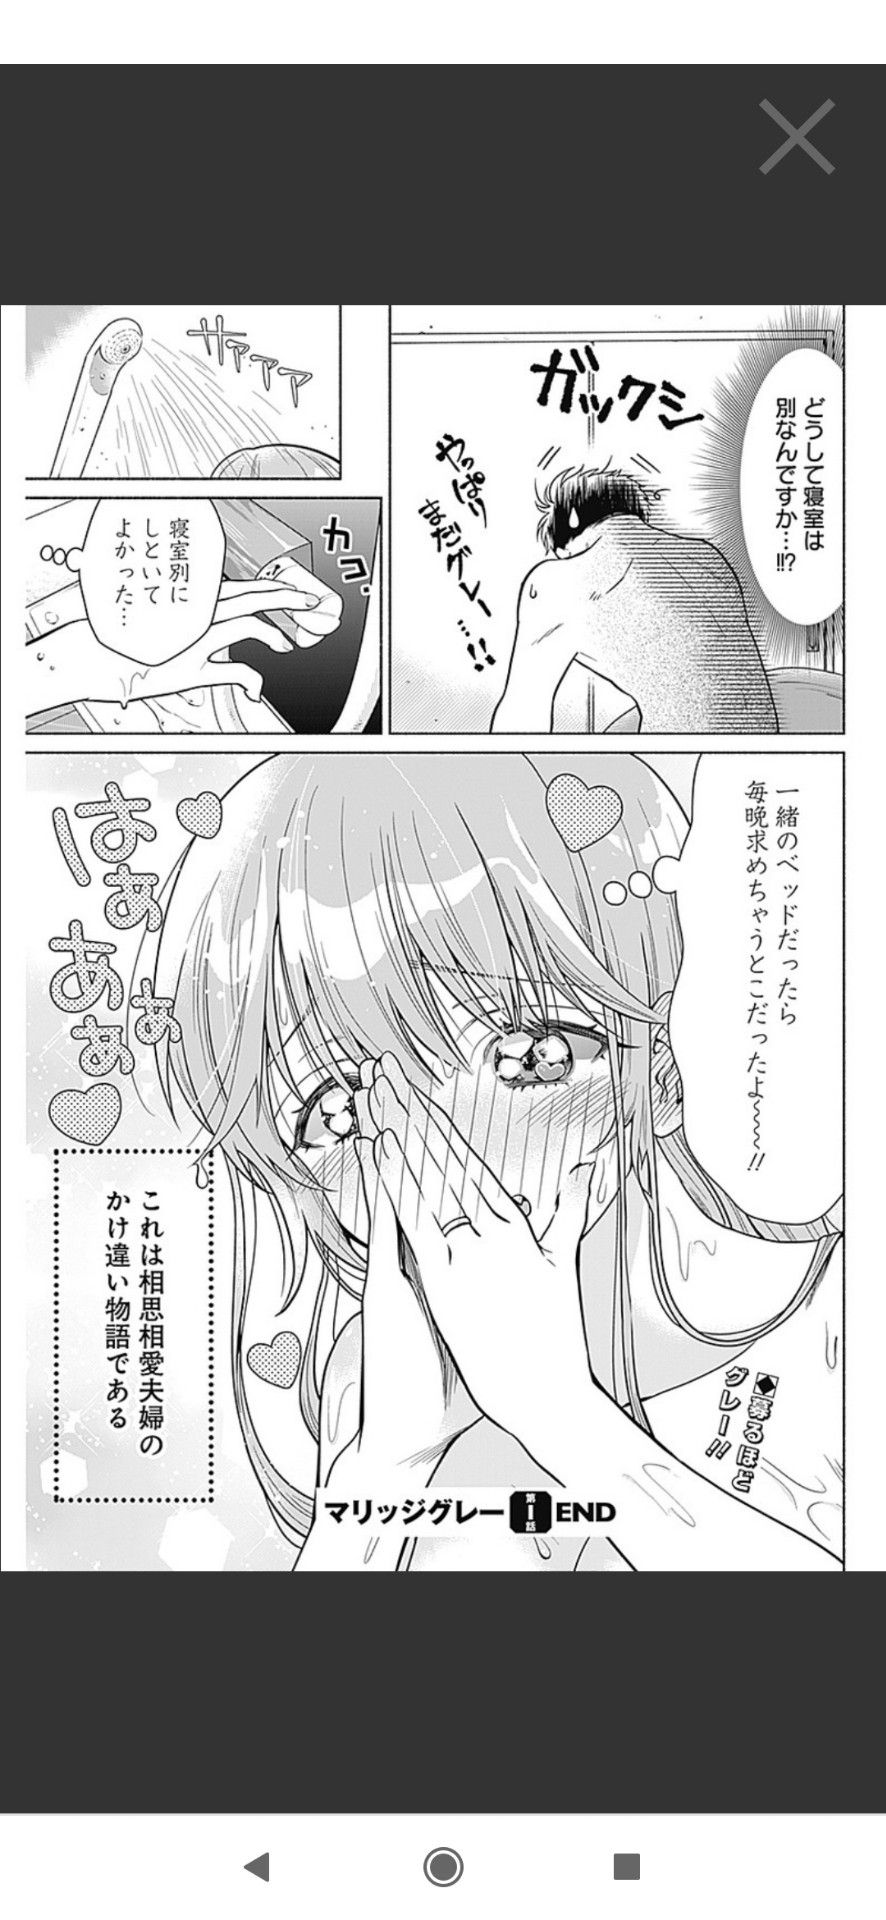 【Image】 A love comedy comic book in which an old man over 30 is enthusiastic is talked about as too much of a kimo ... 7